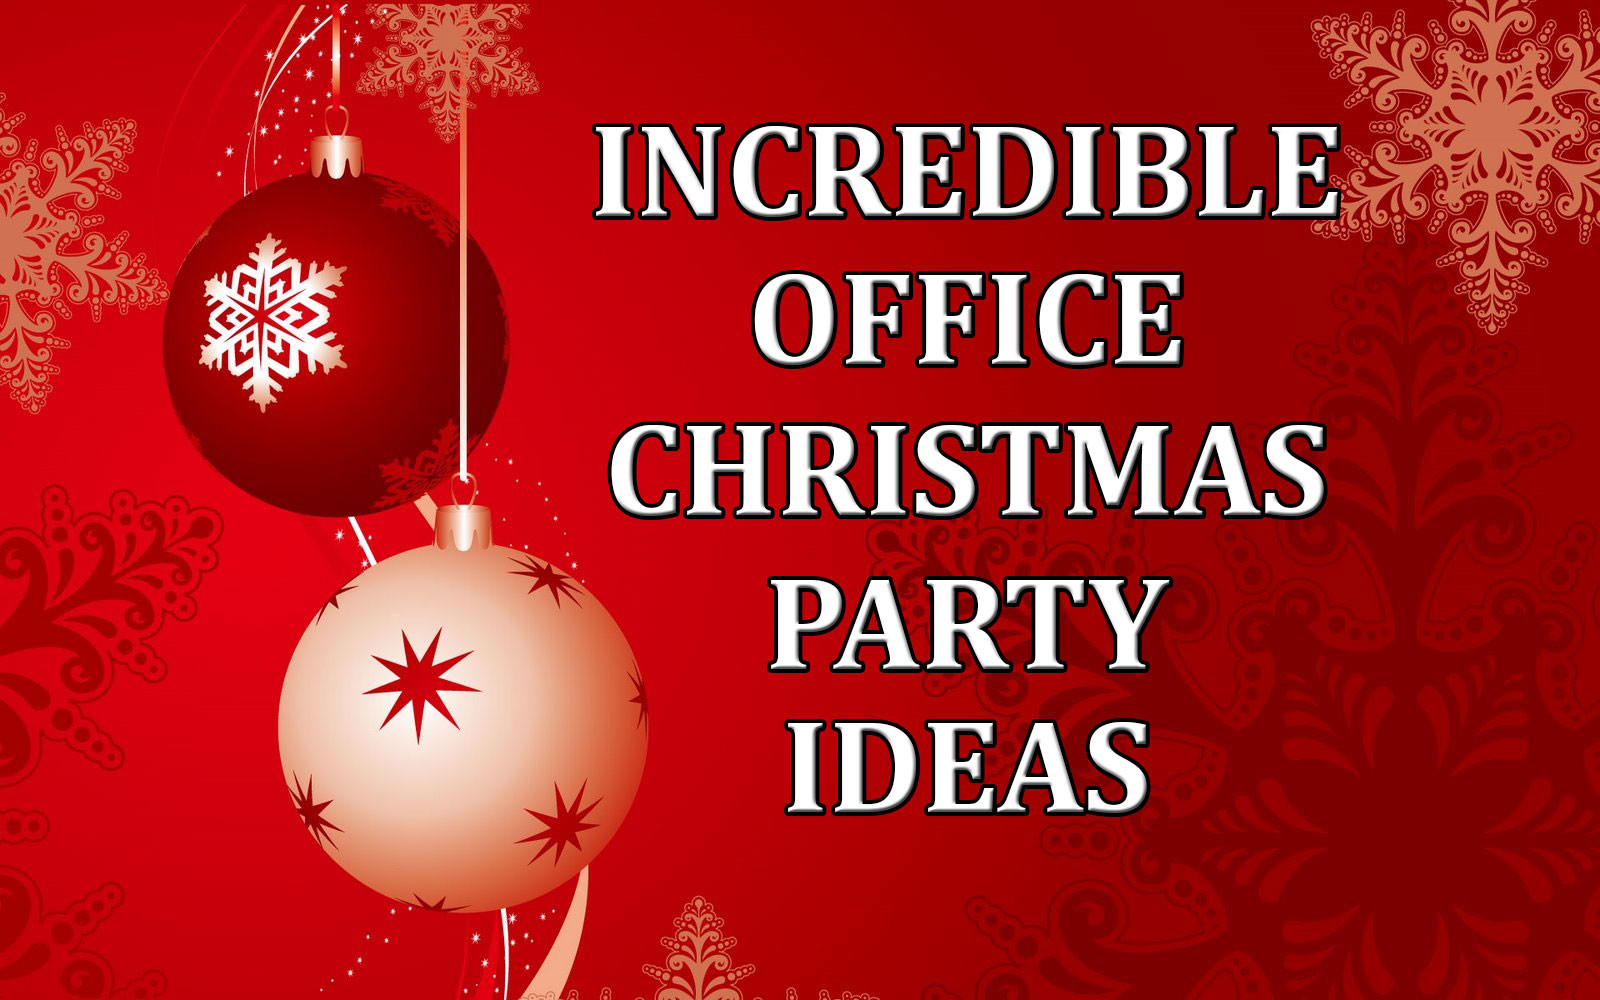 Holiday Party Theme Ideas
 Incredible fice Christmas Party Ideas edy Ventriloquist